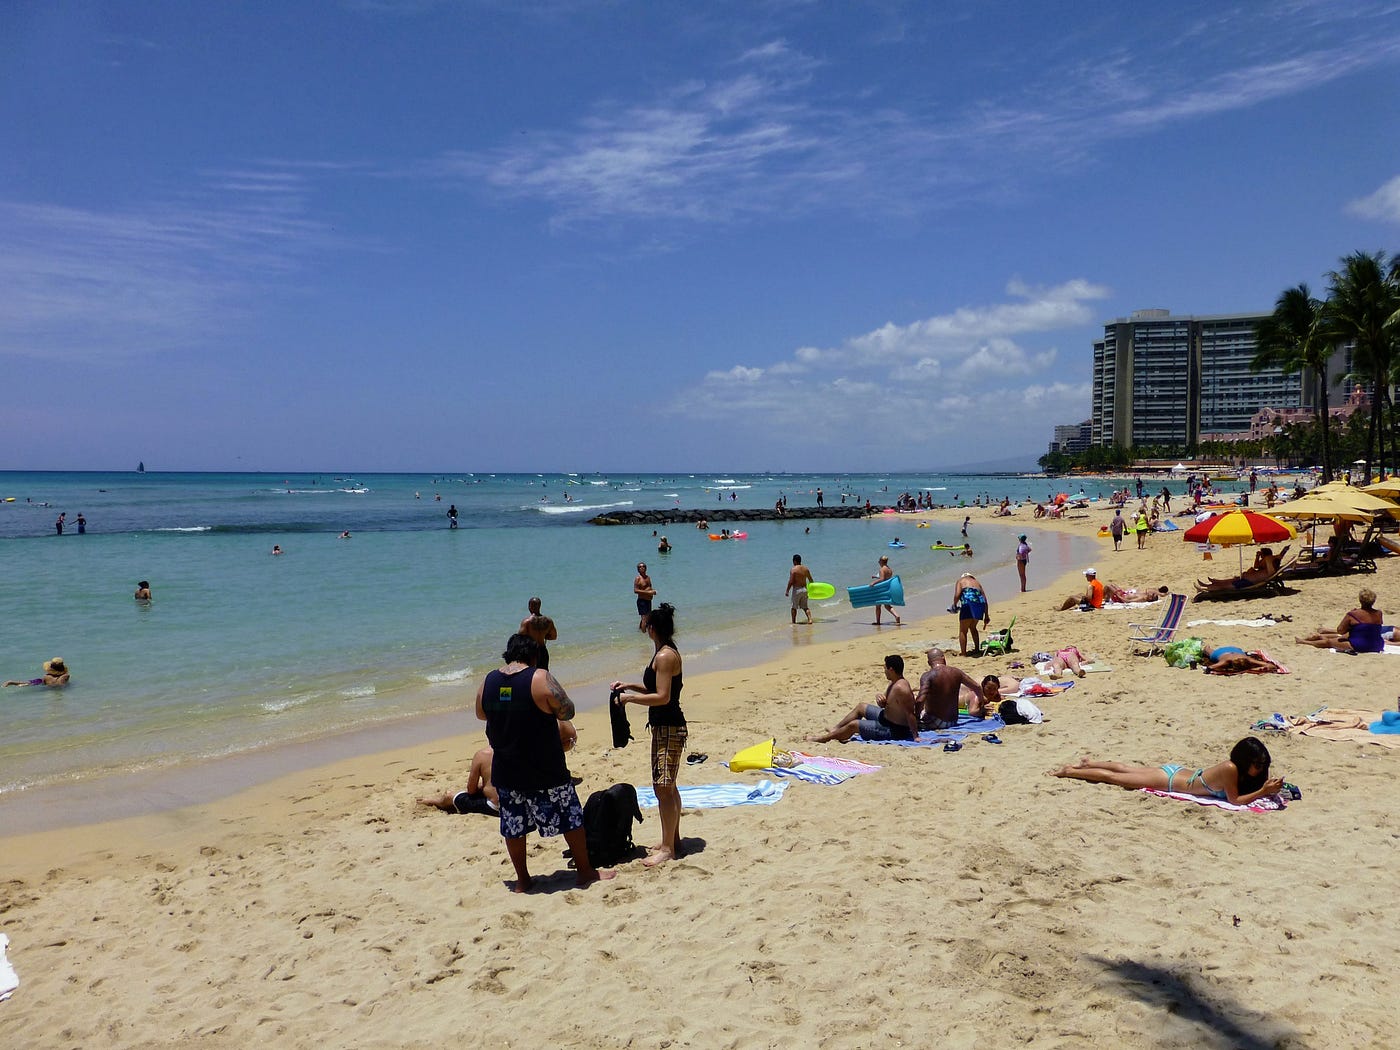 Oahu Topless Beach - Oahu Hawaii: Things To Do For Older Adults, Young, And Kids | by Grazy Goat  | Grazy Goat | Medium